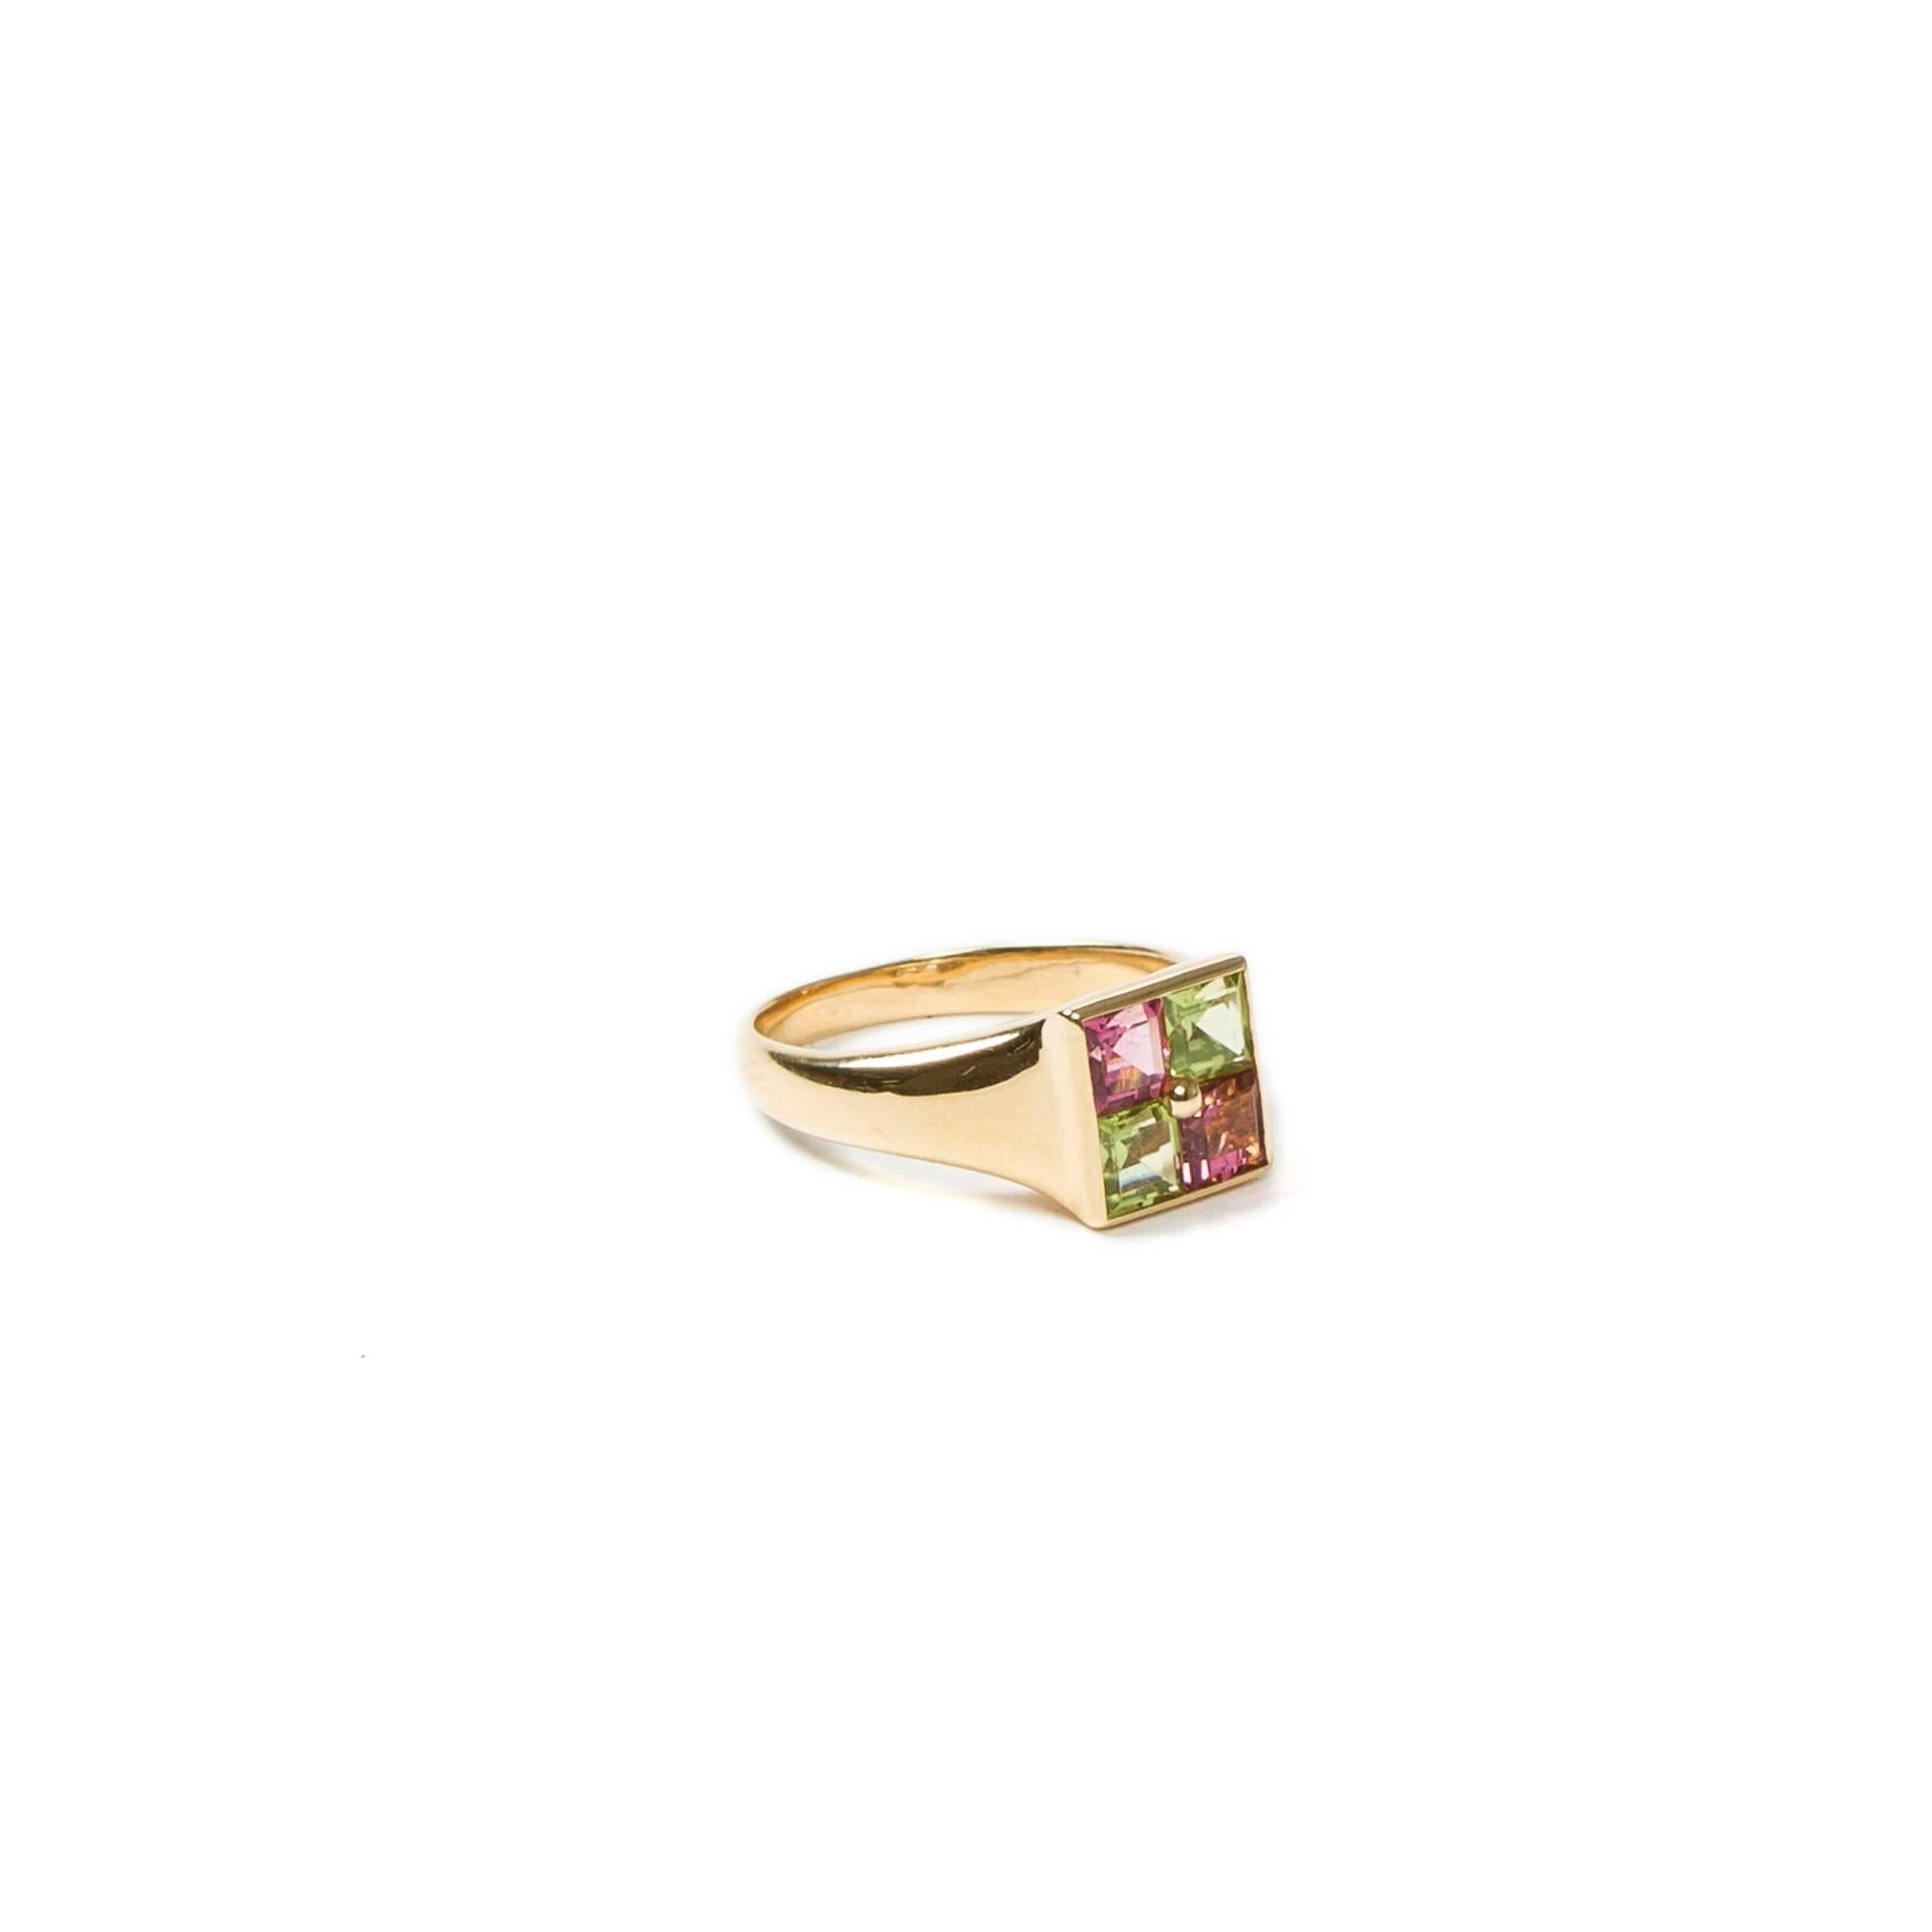 Square ring in 750 yellow gold with 2 princess cut peridots and 2 princess cut pink tourmalines. Each stone mesures about 4mm. Hallmarks inside the ring 